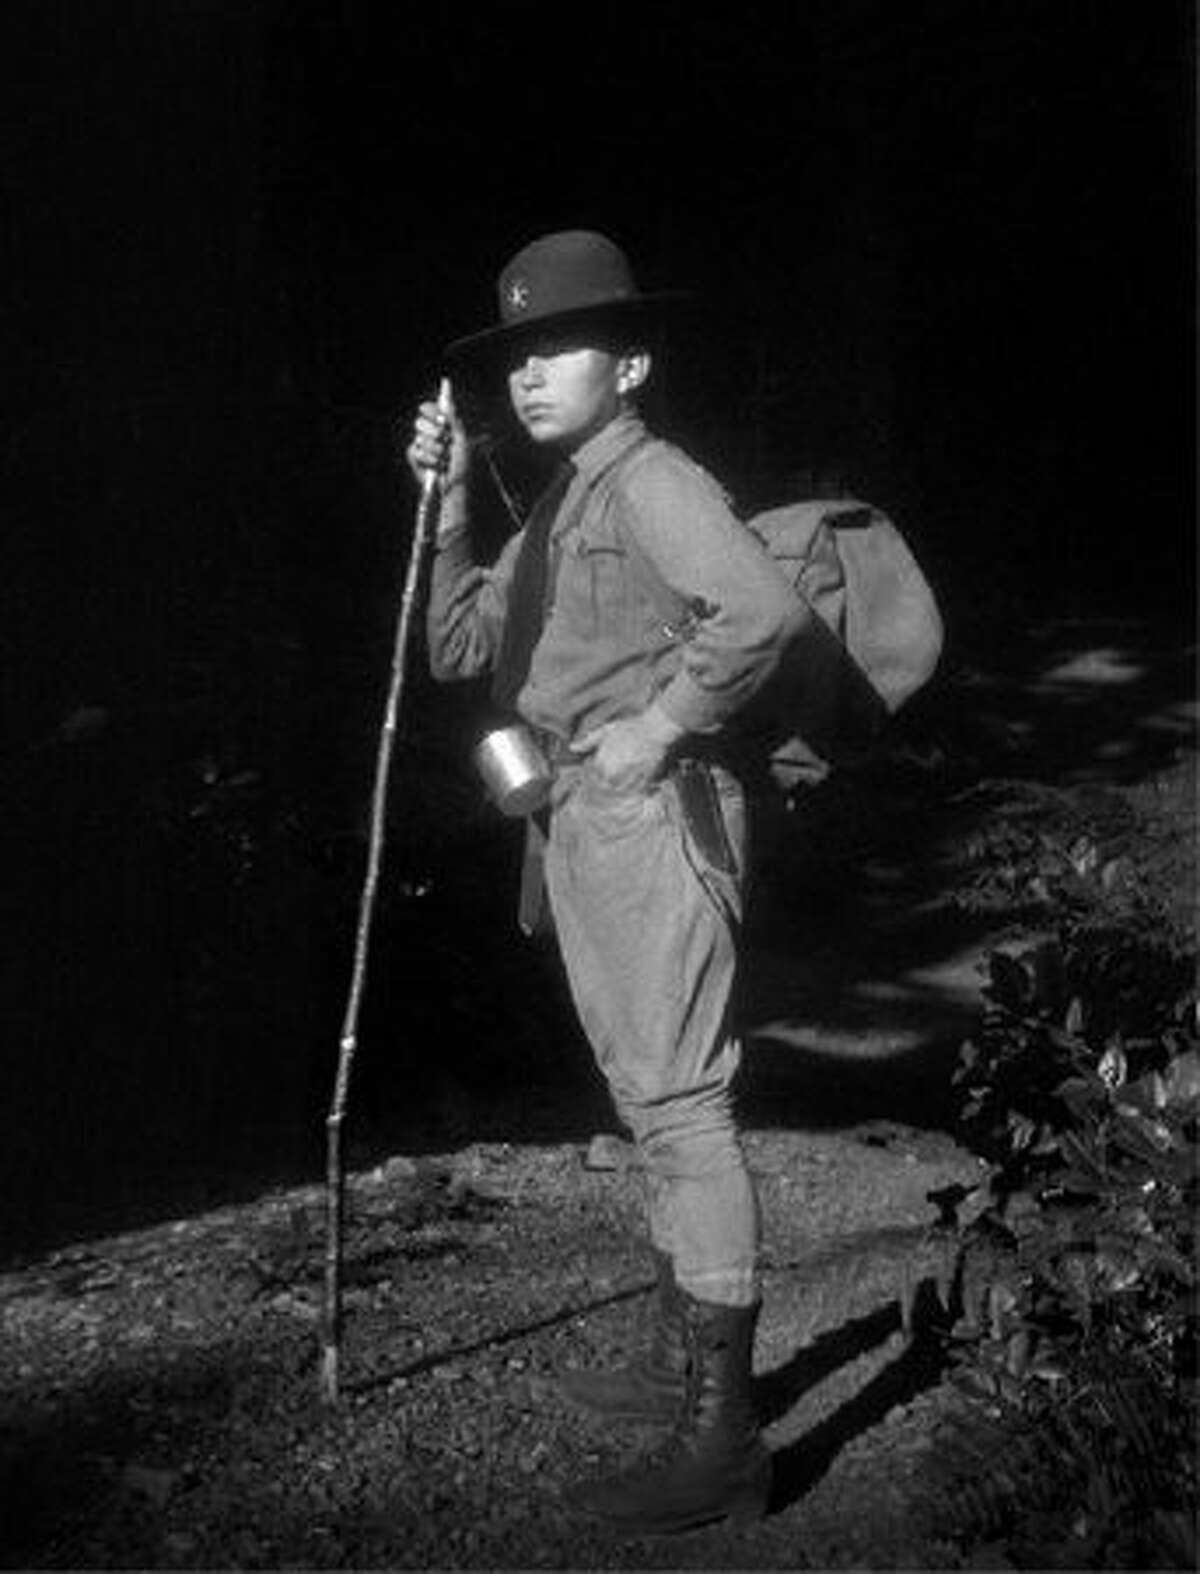 Church of Scientology founder L. Ron Hubbard in Seattle in 1923, as a Boy Scout. Hubbard was only 12 years old when this picture was taken. (Author Services, Inc. - LRonHubbard.org)